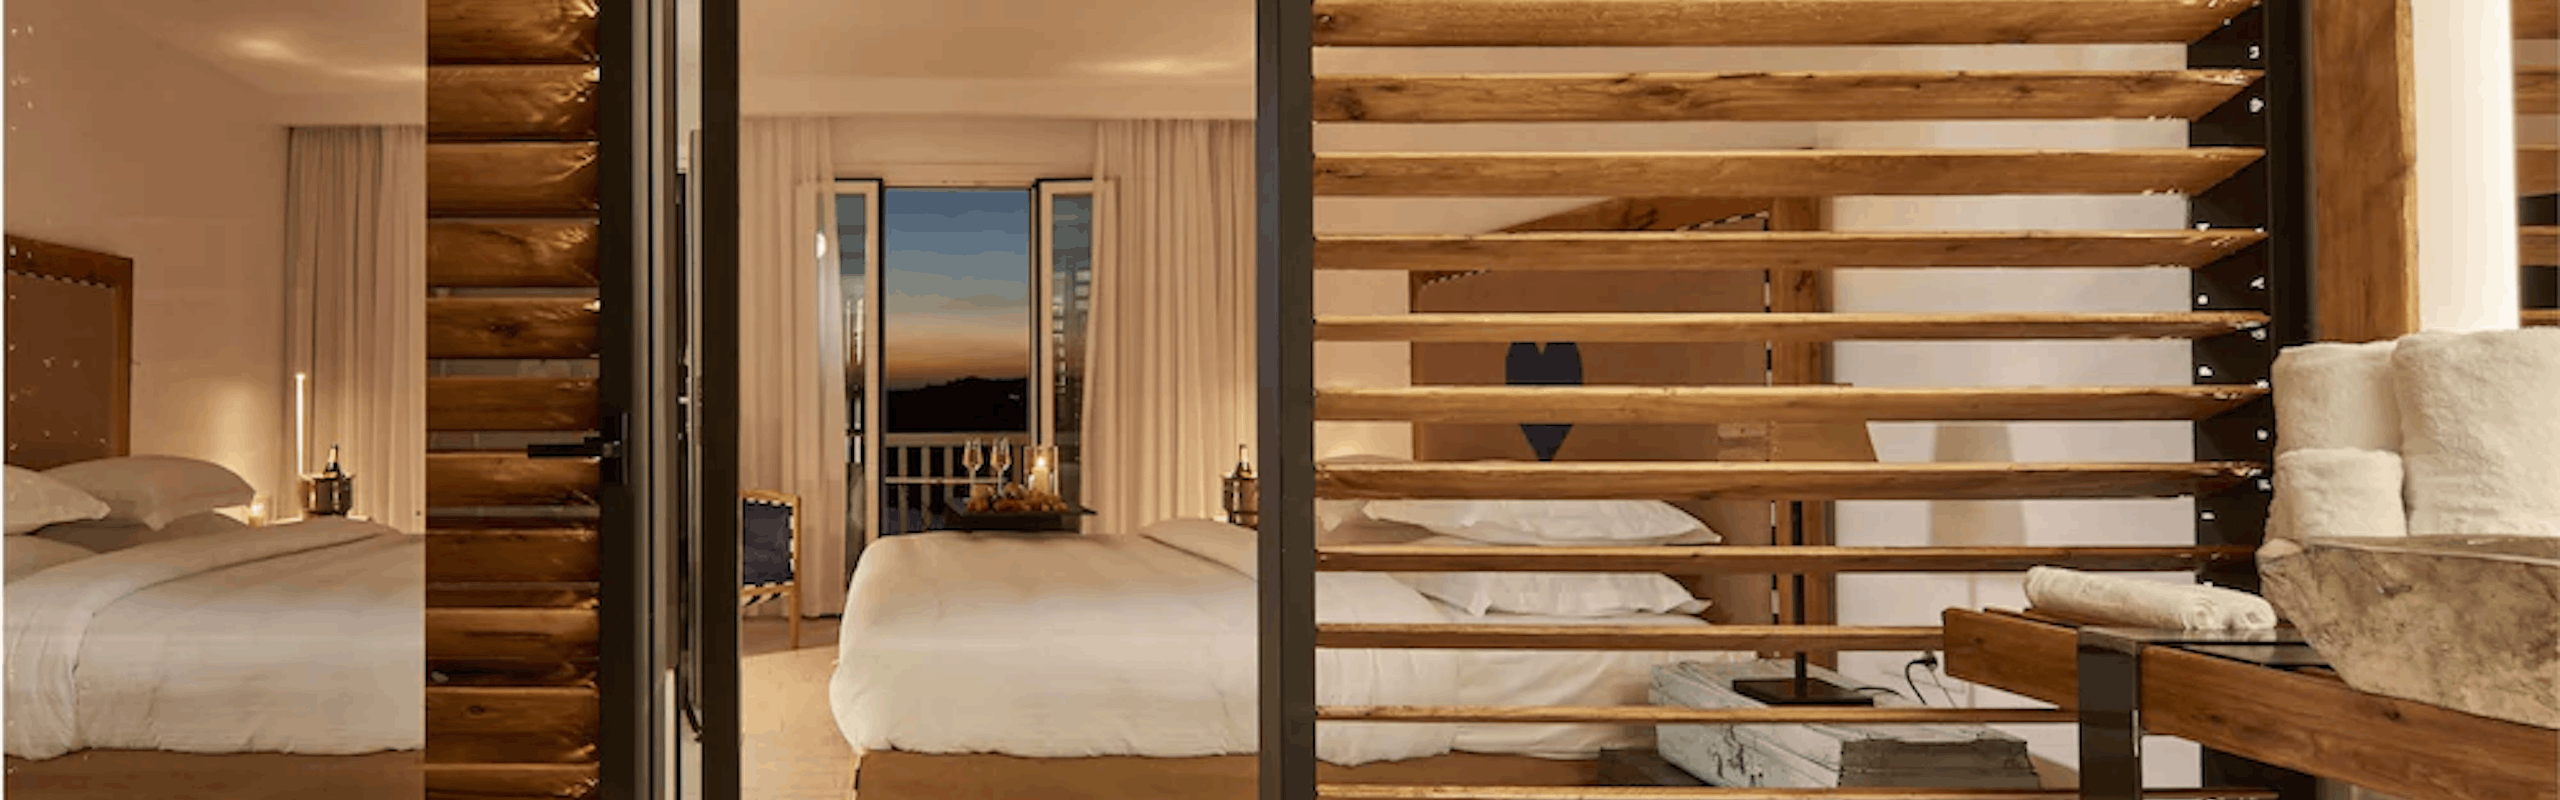 Hotel bed with white sheets, wood details, and a balcony door open with a sunset in background. 